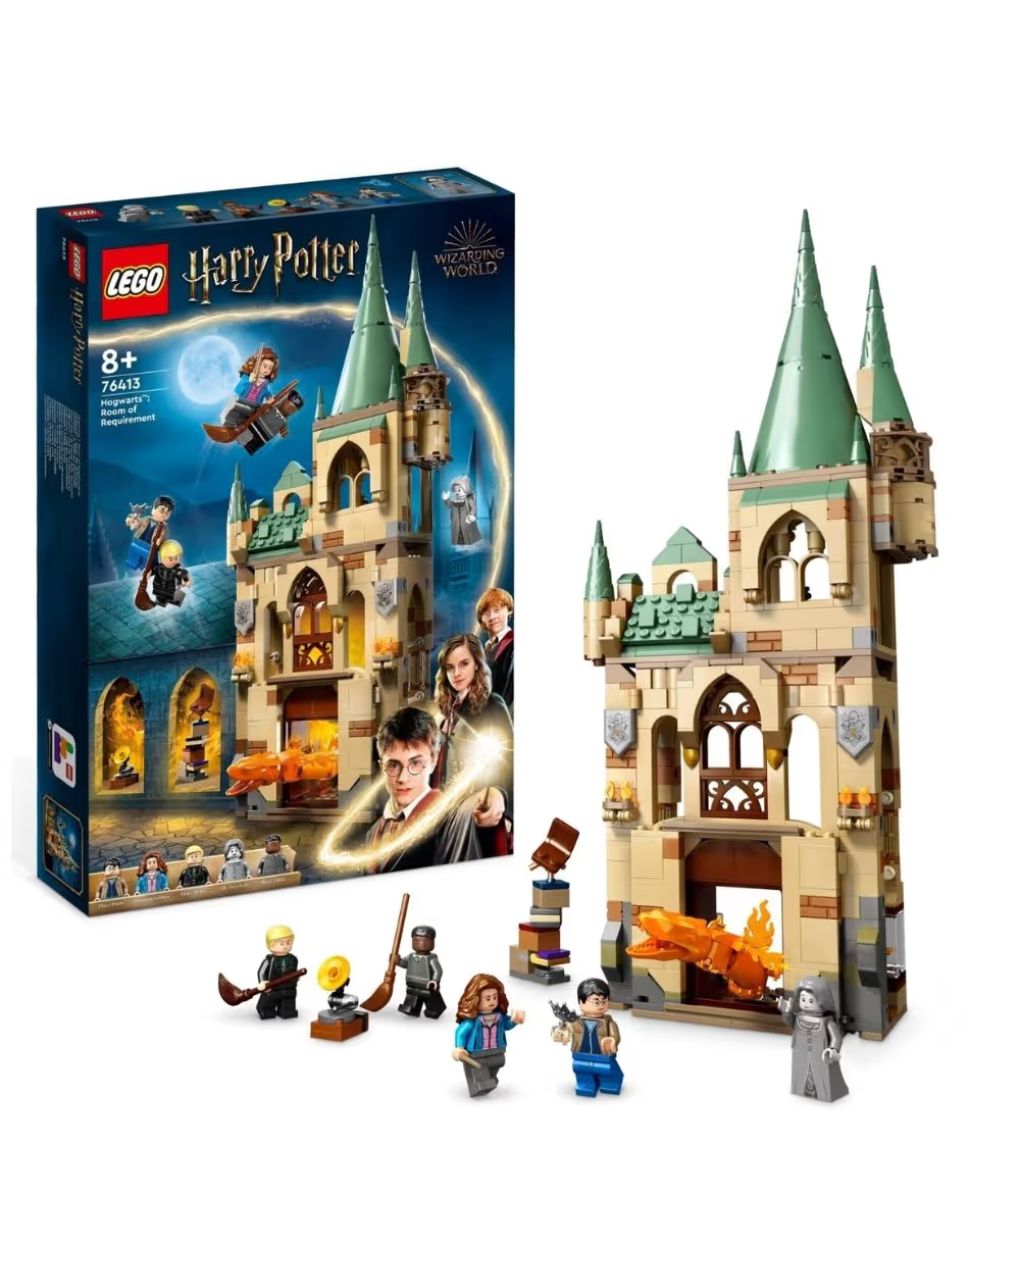 Lego harry potter hogwarts: room of requirement 76413